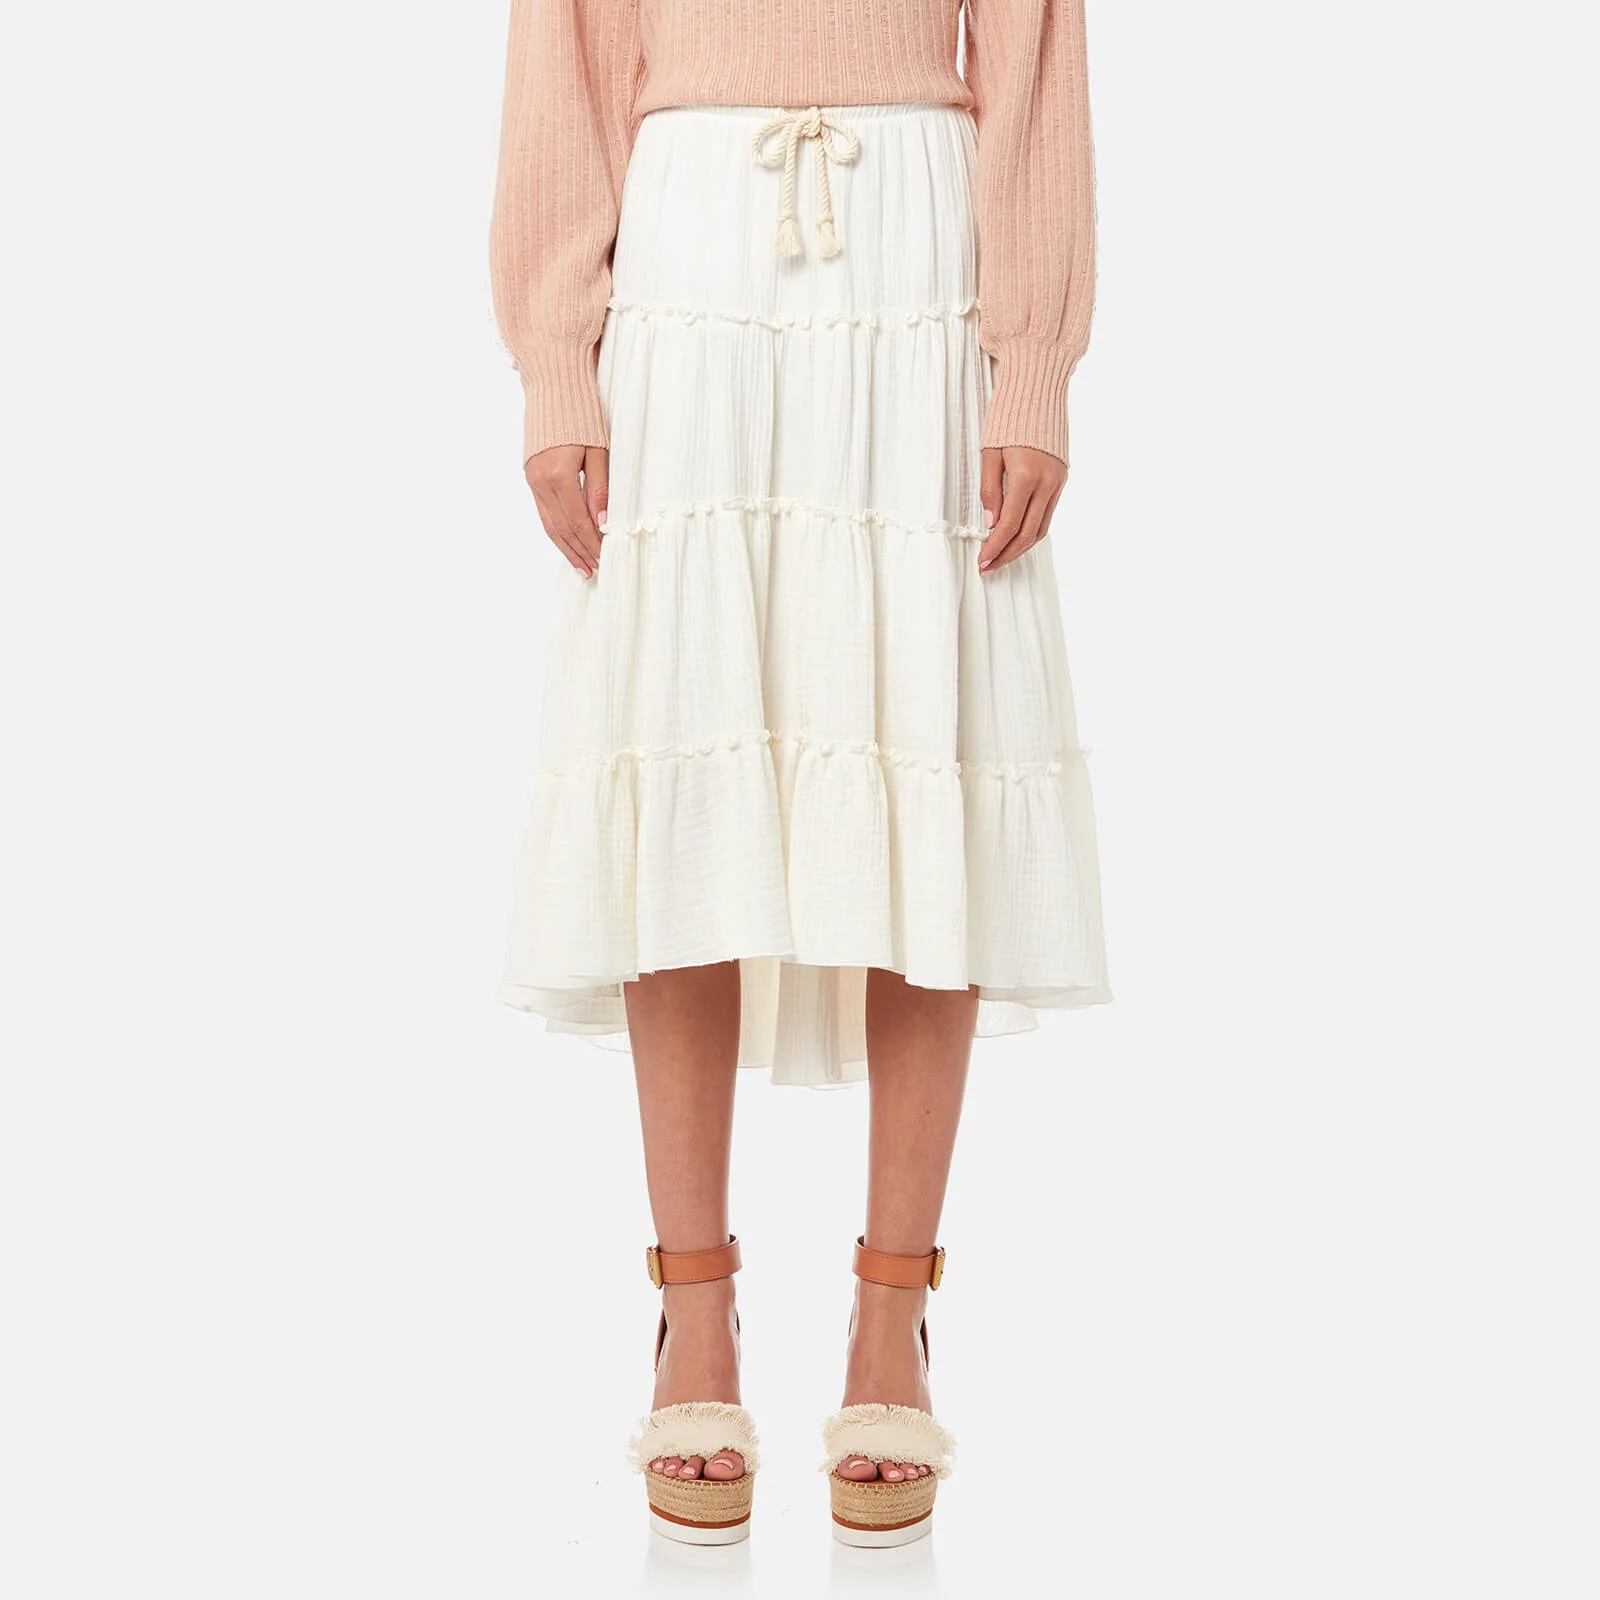 See By Chloé Women's Embellished Cheesecloth Skirt - White Powder Image 1